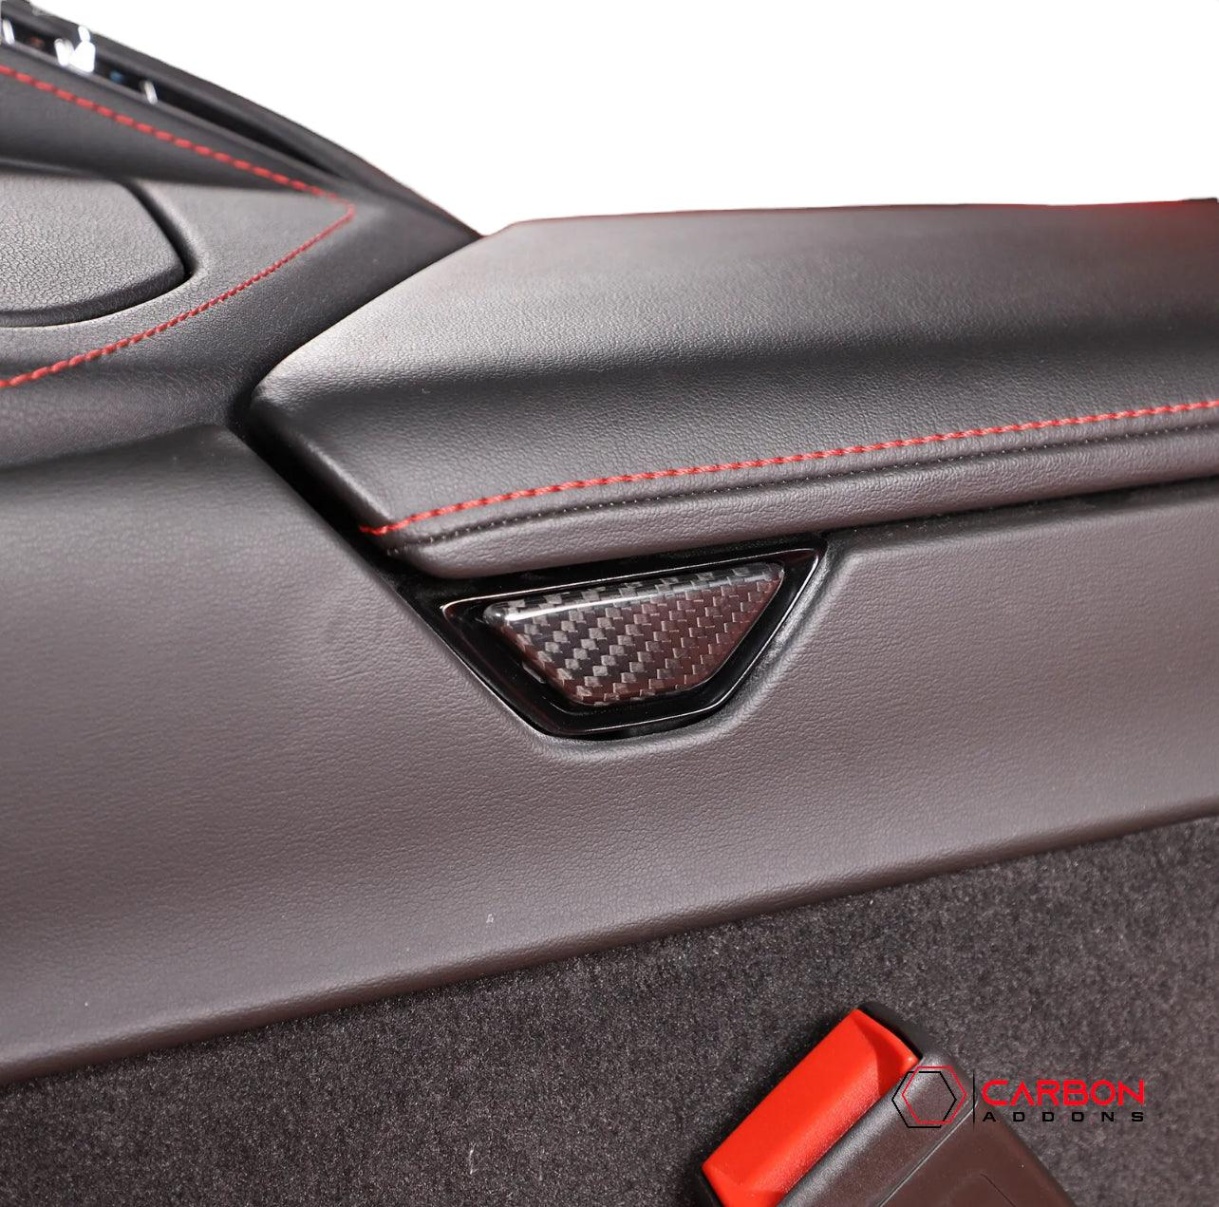 Upgrade Your C8 Corvette With Top-notch Accessories For A Stylish Ride!